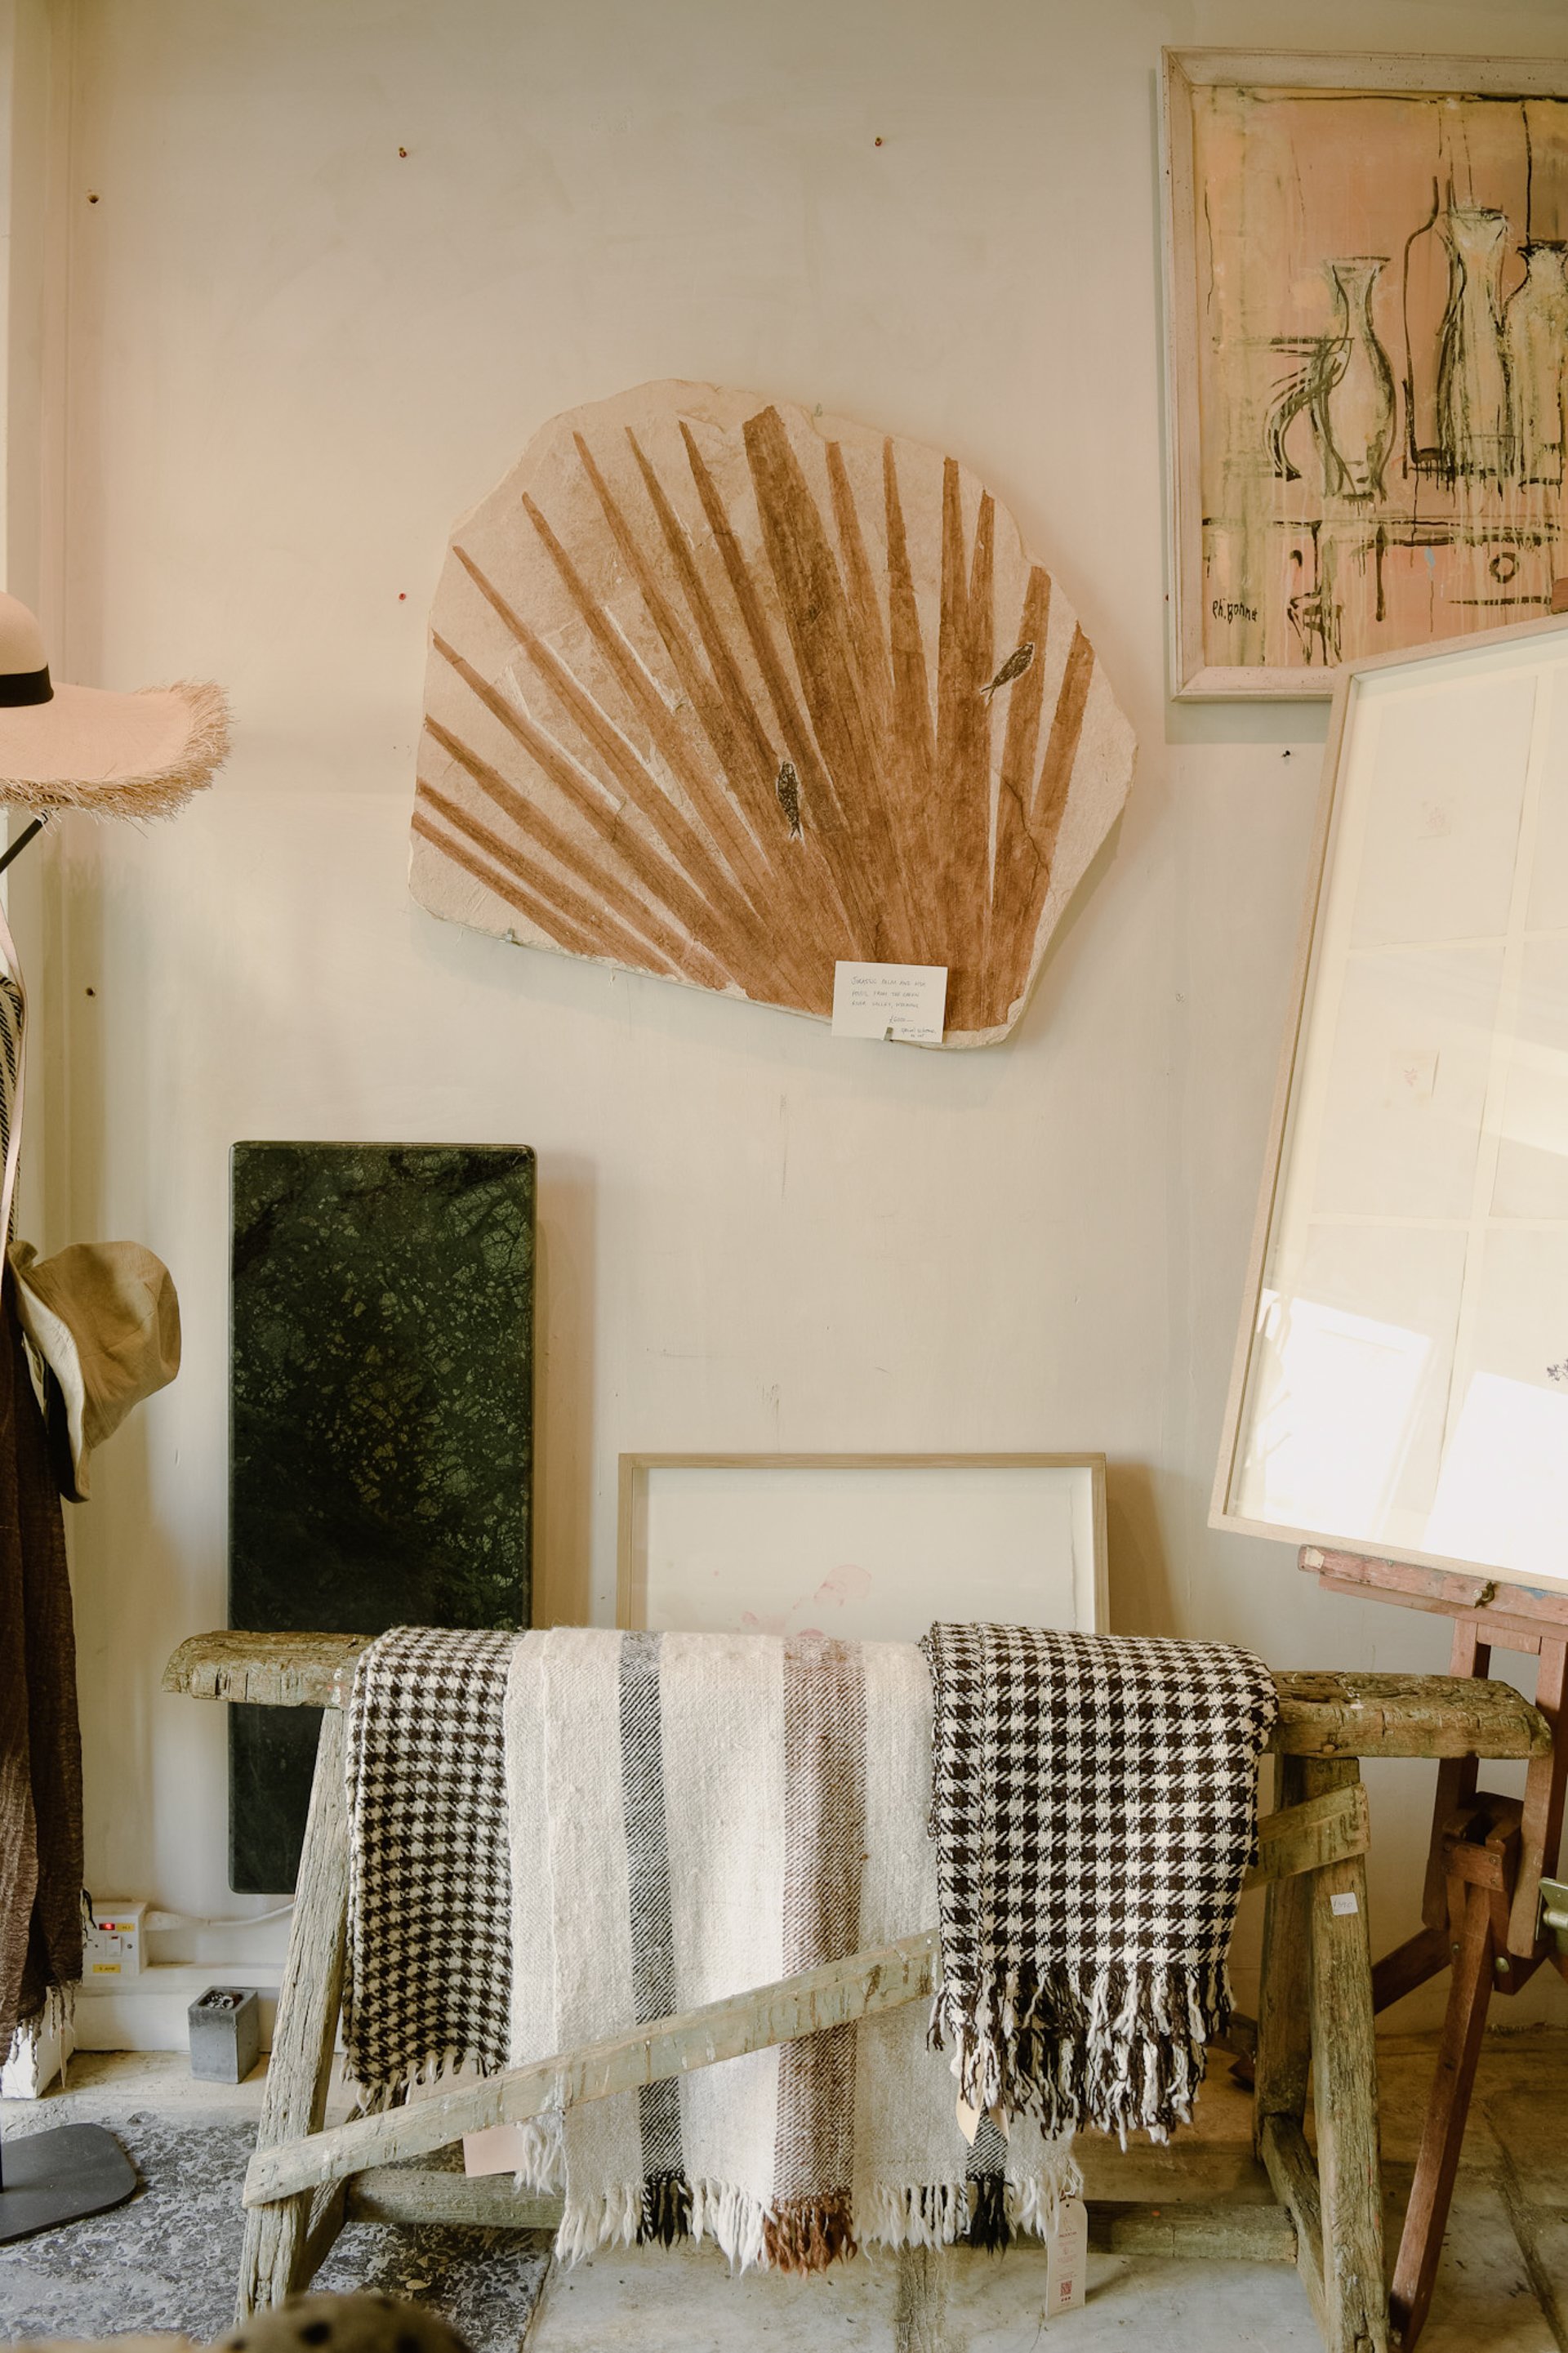 Art and textiles for sale in Katrina Phillips store, London